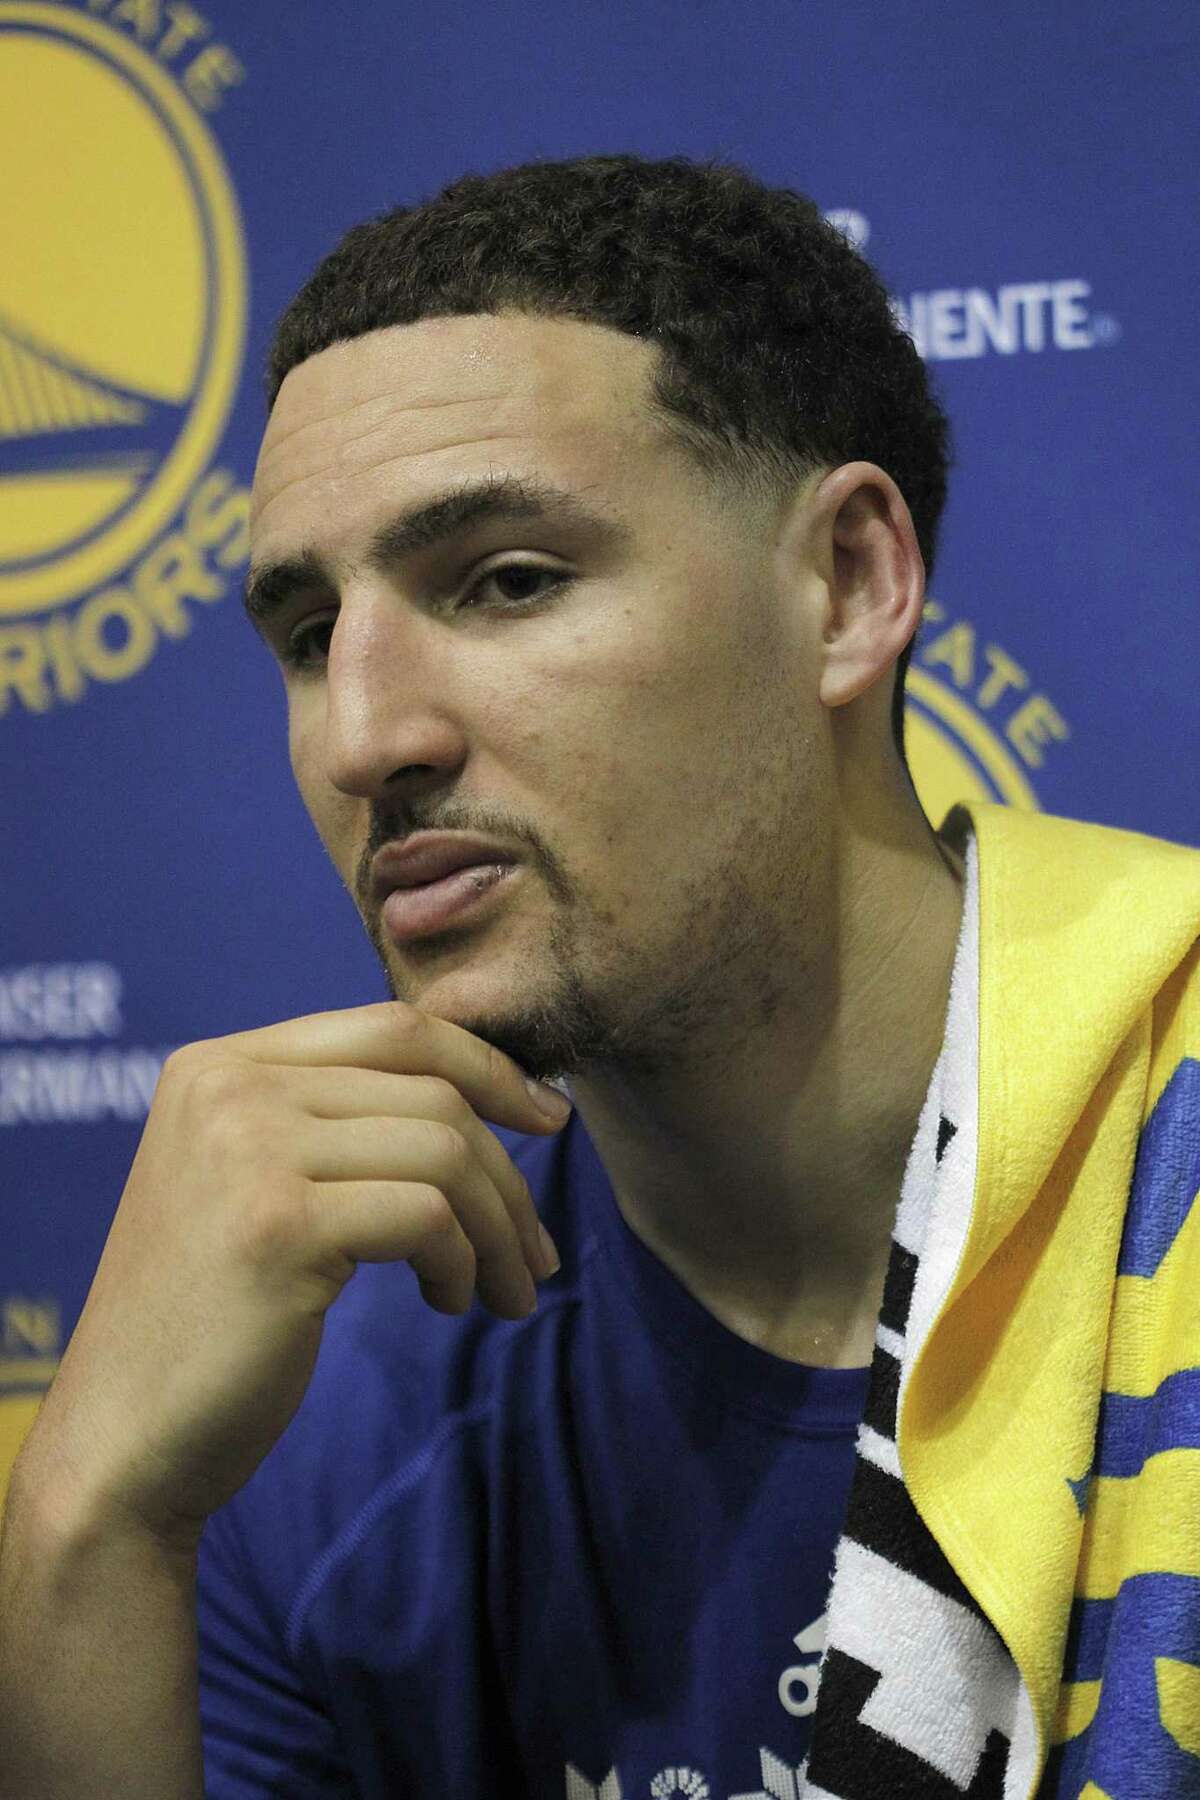 Warriors’ Klay Thompson talks to the media after practice on May 18, 2017, in Oakland, Calif.